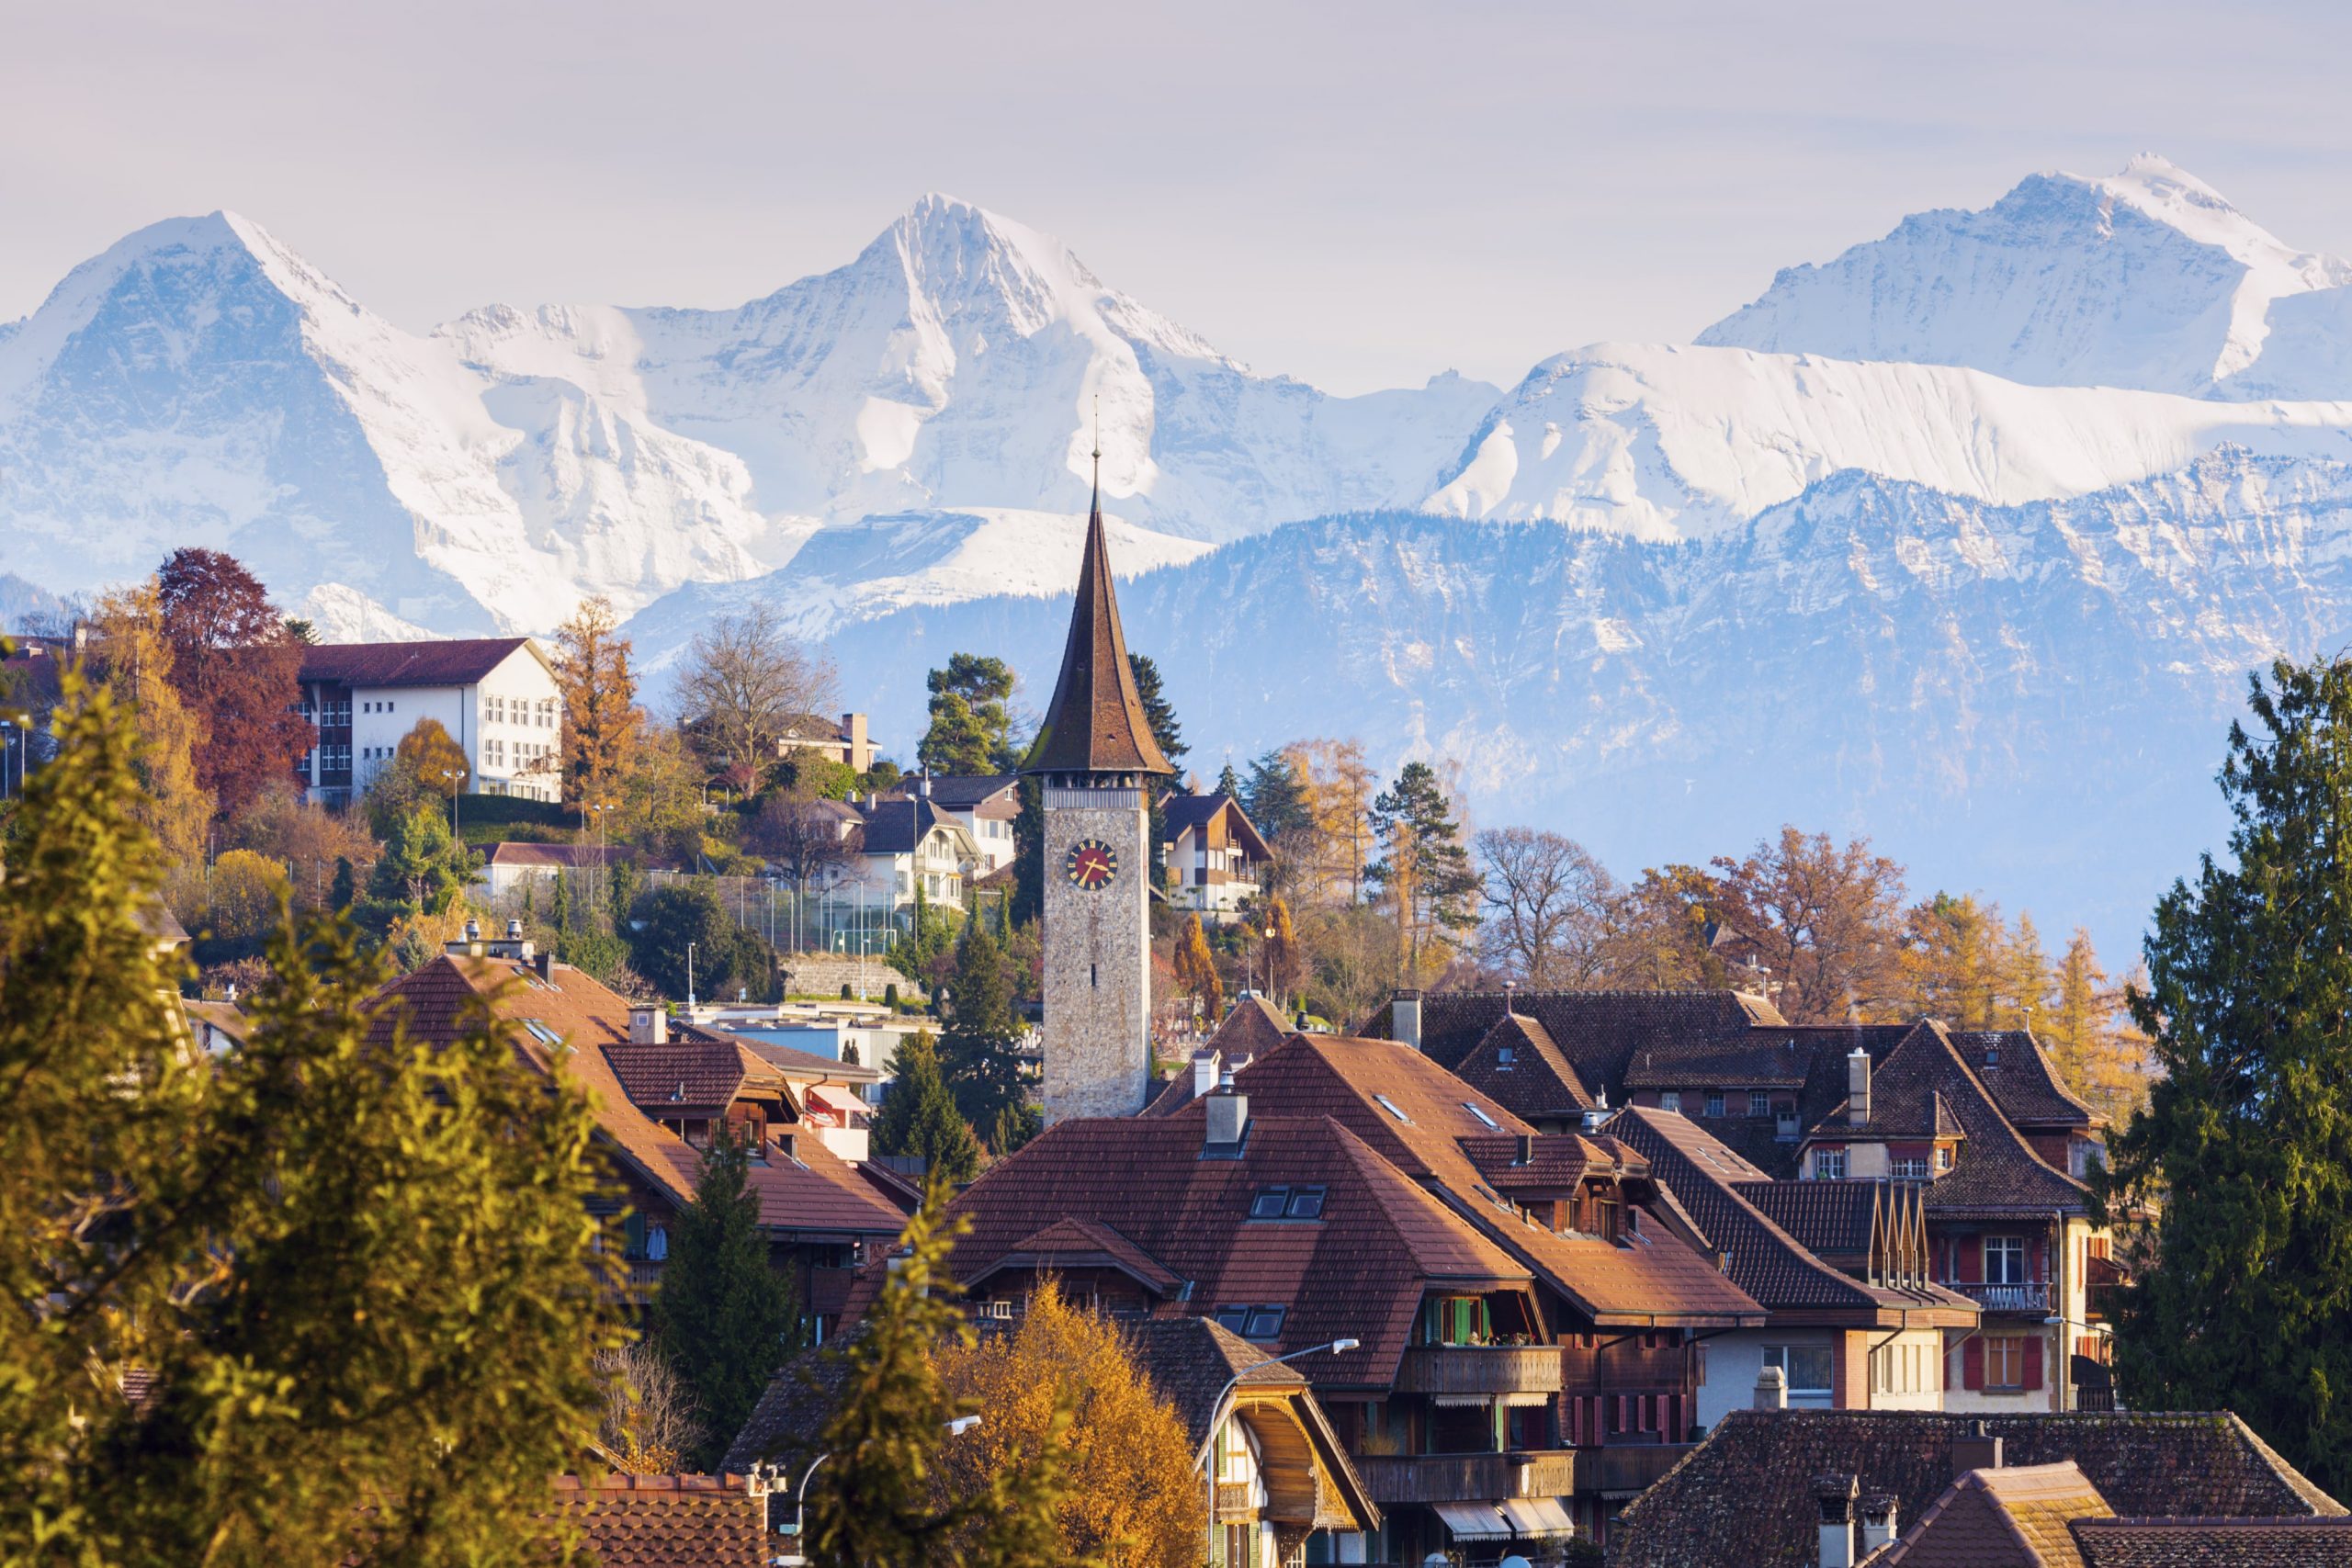 Switzerland aims to go climate neutral by 2050